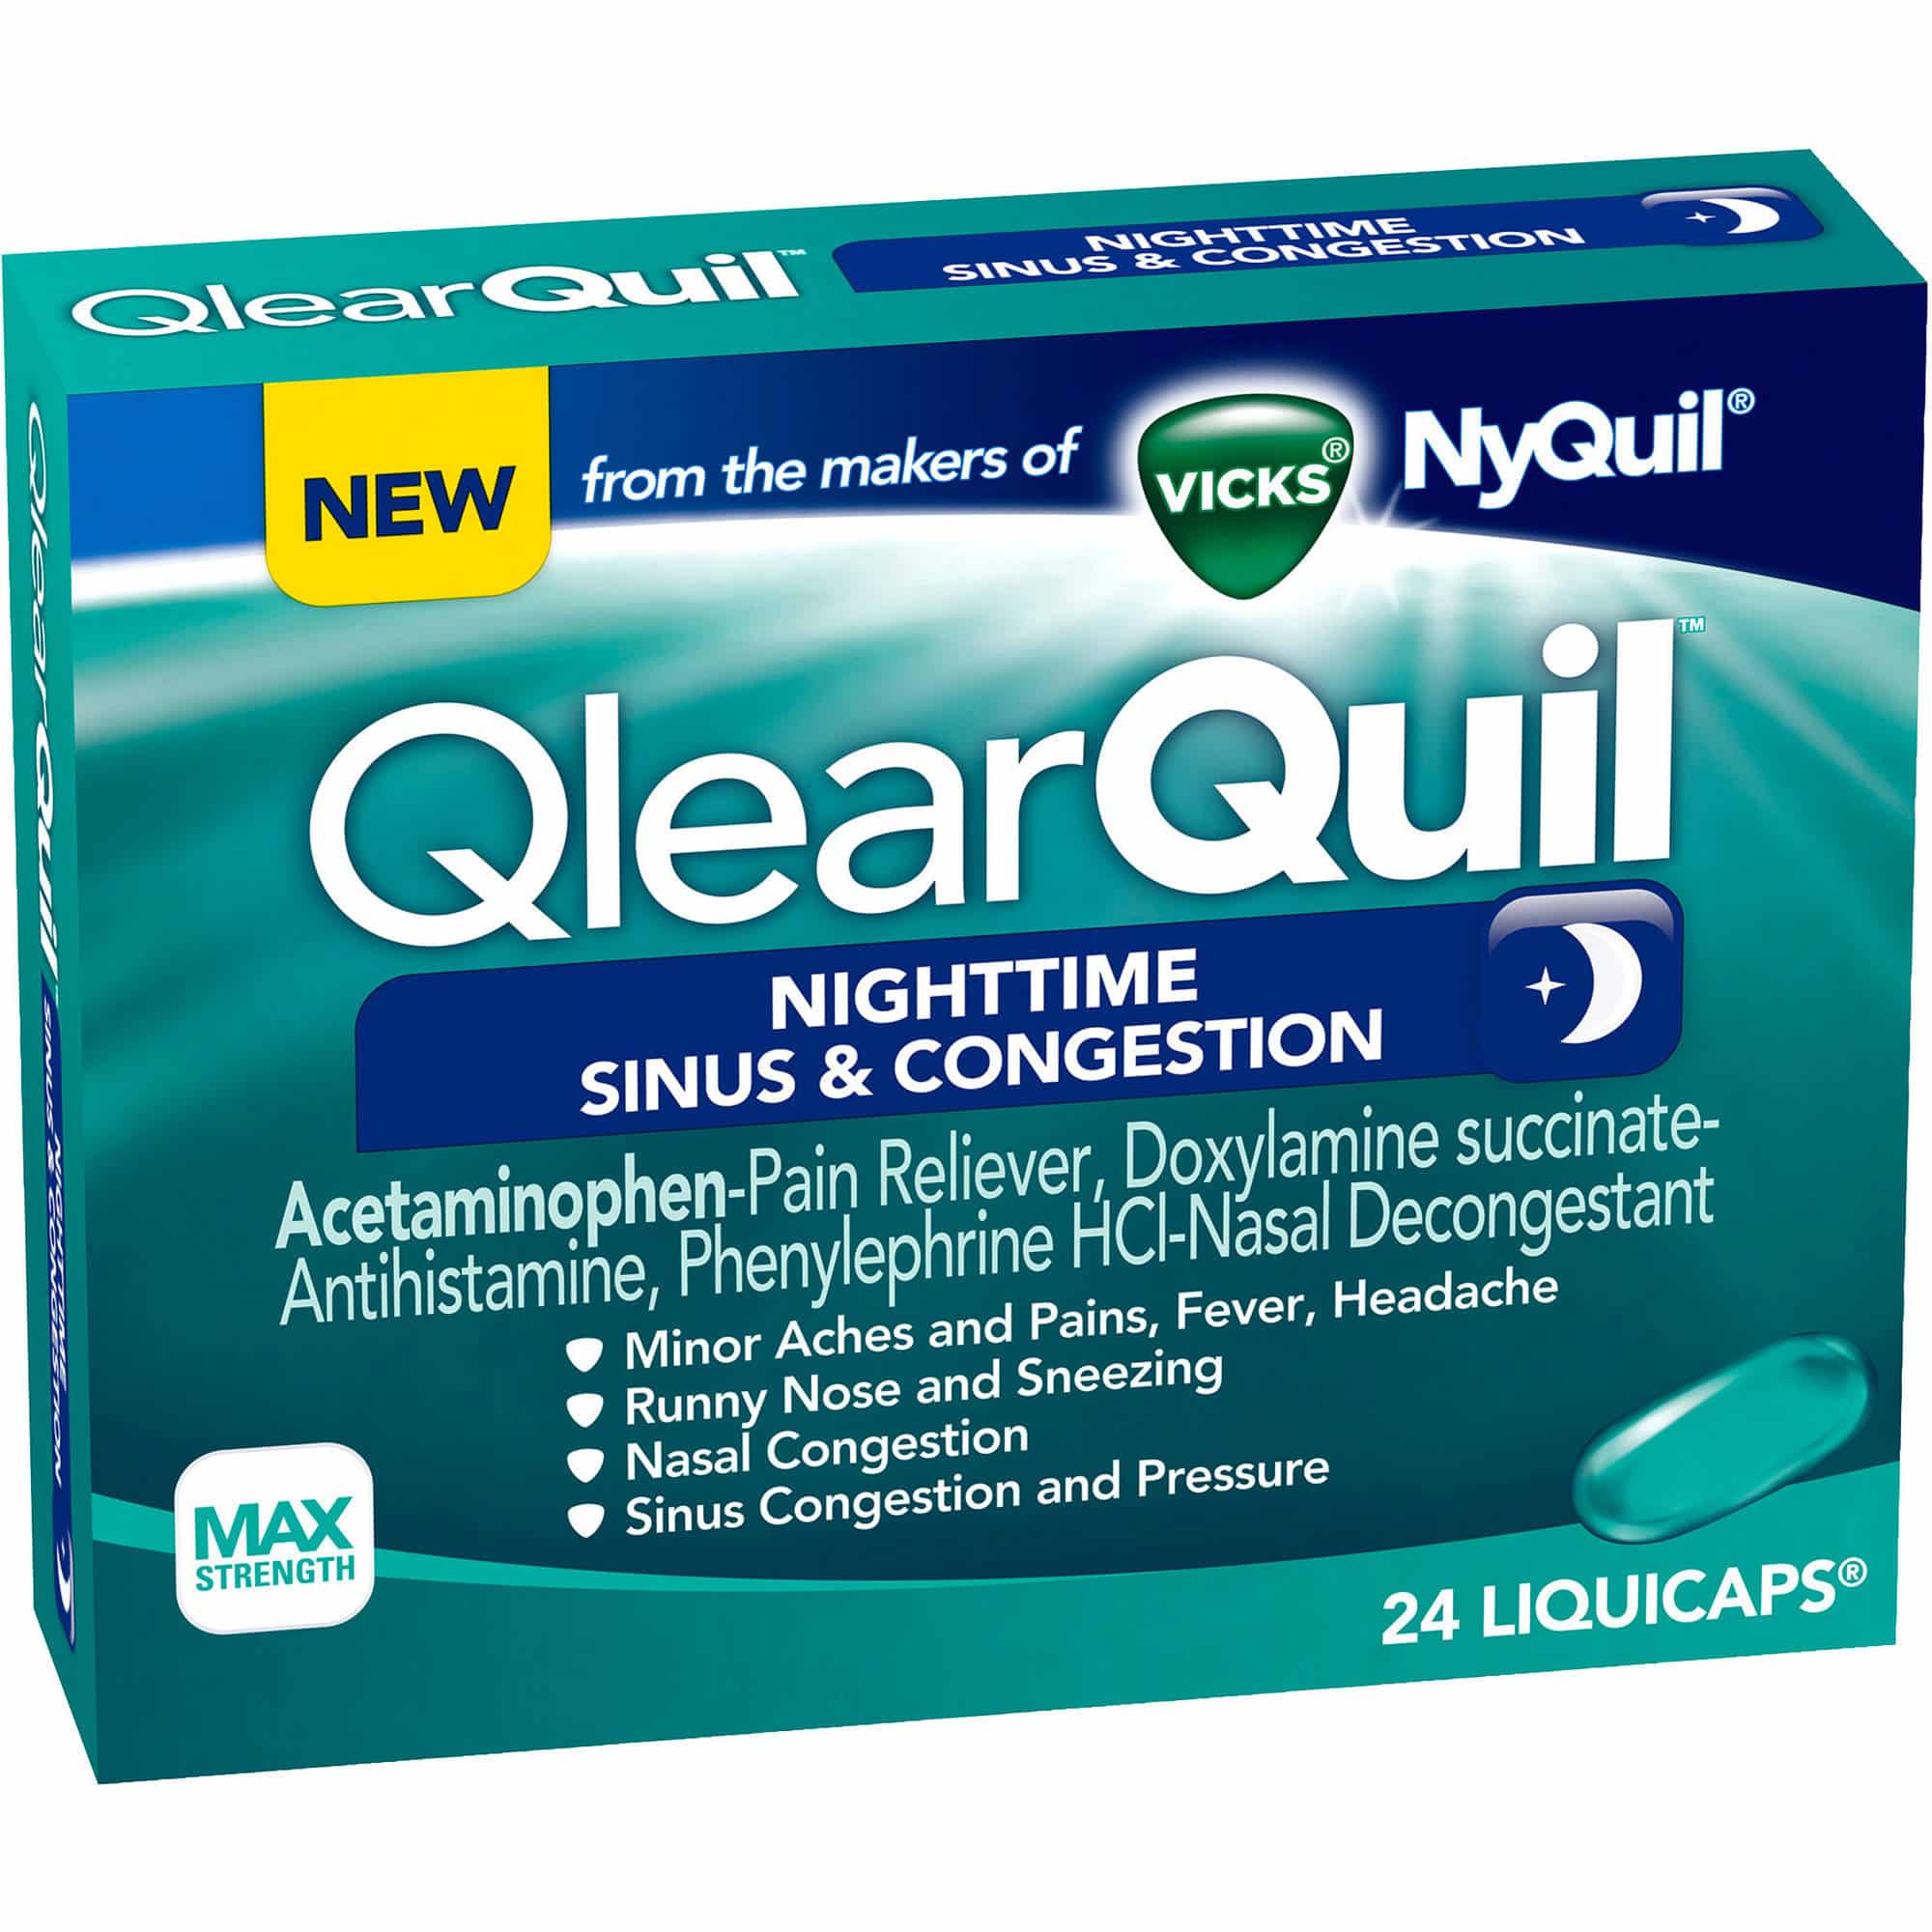 Vicks Qlearquil Nighttime Sinus Congestion, 24 CT (Pack of 6)